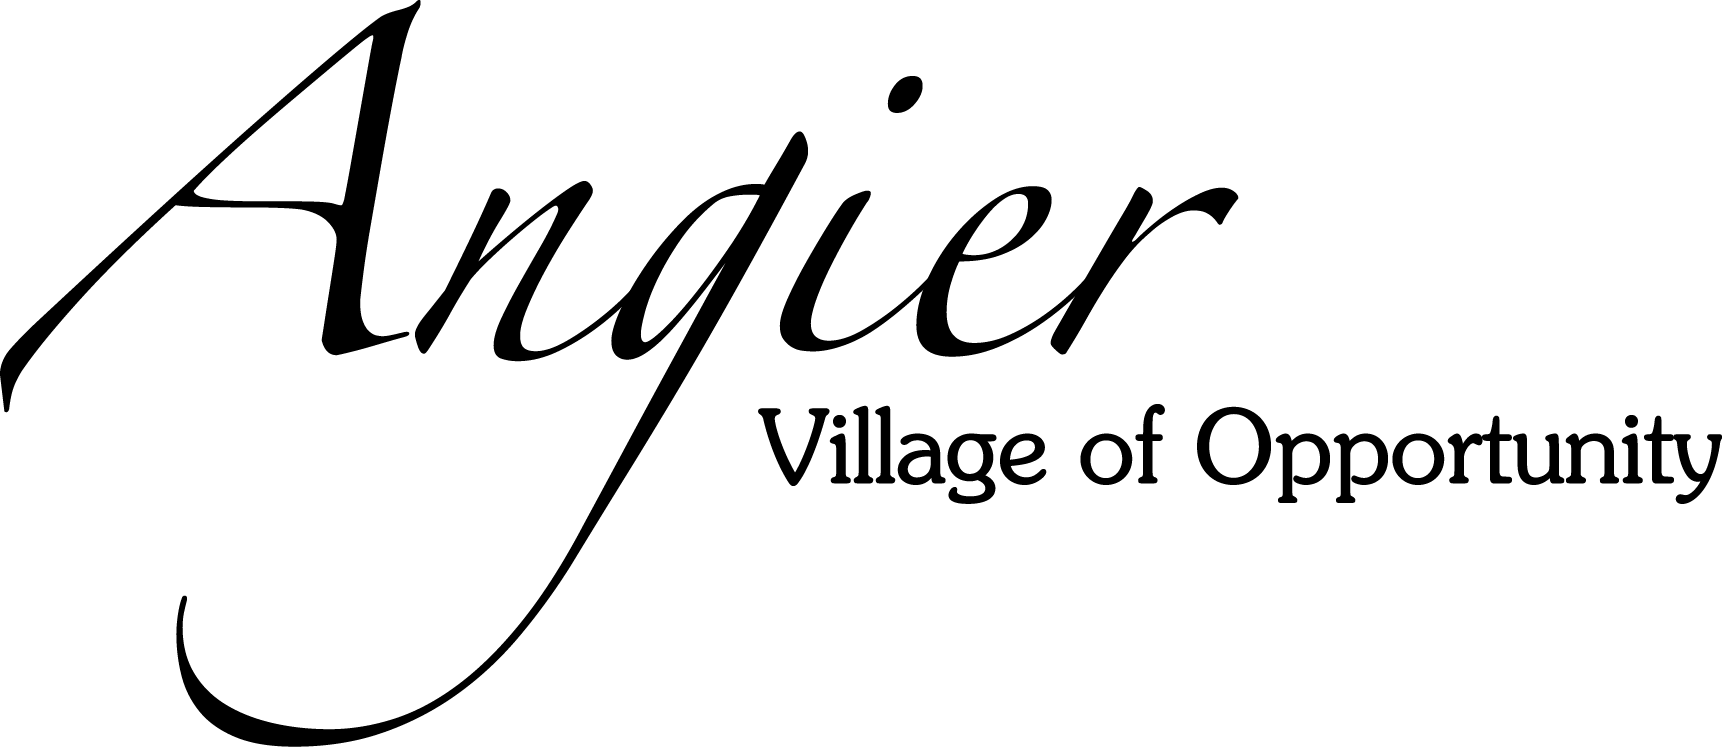 Logo with text saying Angier, Village of Opportunity for the town of Angier, North Carolina